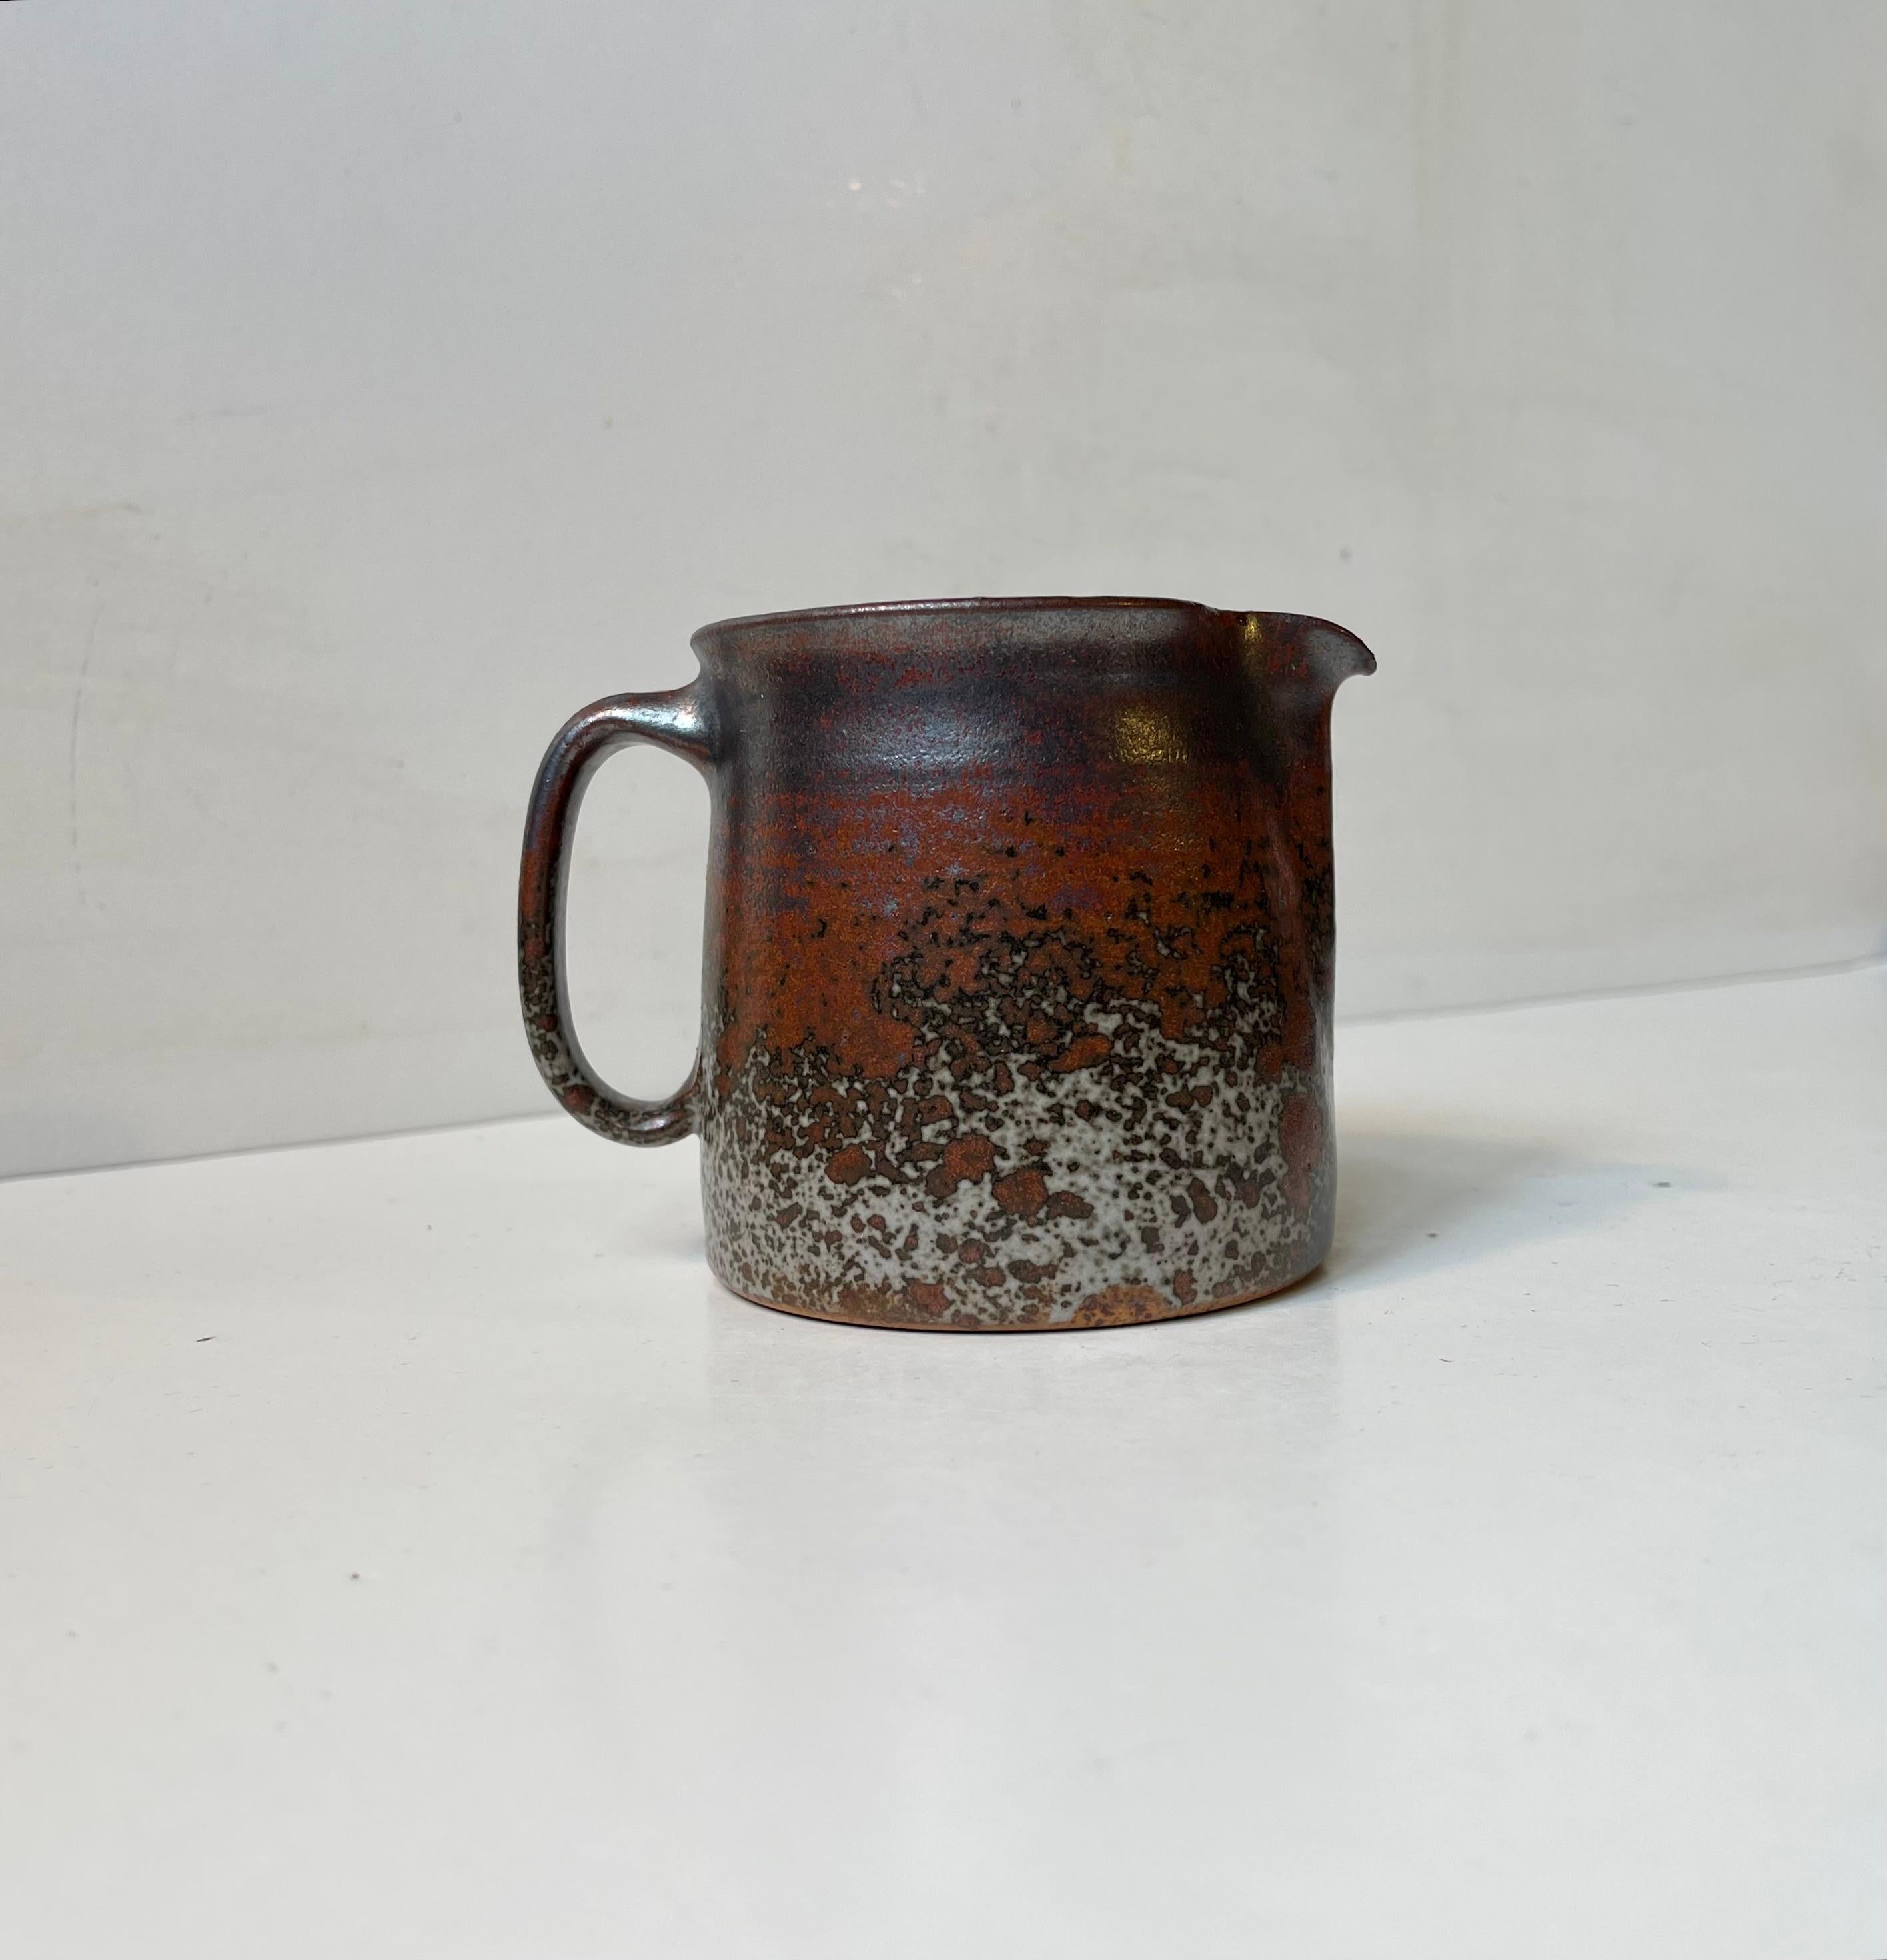 Small exceptional stoneware jug heavily decorated with earthy crystalline glazes by Jacob Bang. The kid brother of Arne Bang. Made in Jakob E. Bangs studio during the early 1960s. Signed by the designer to the base. Measurements: H: 9 cm, D/W: